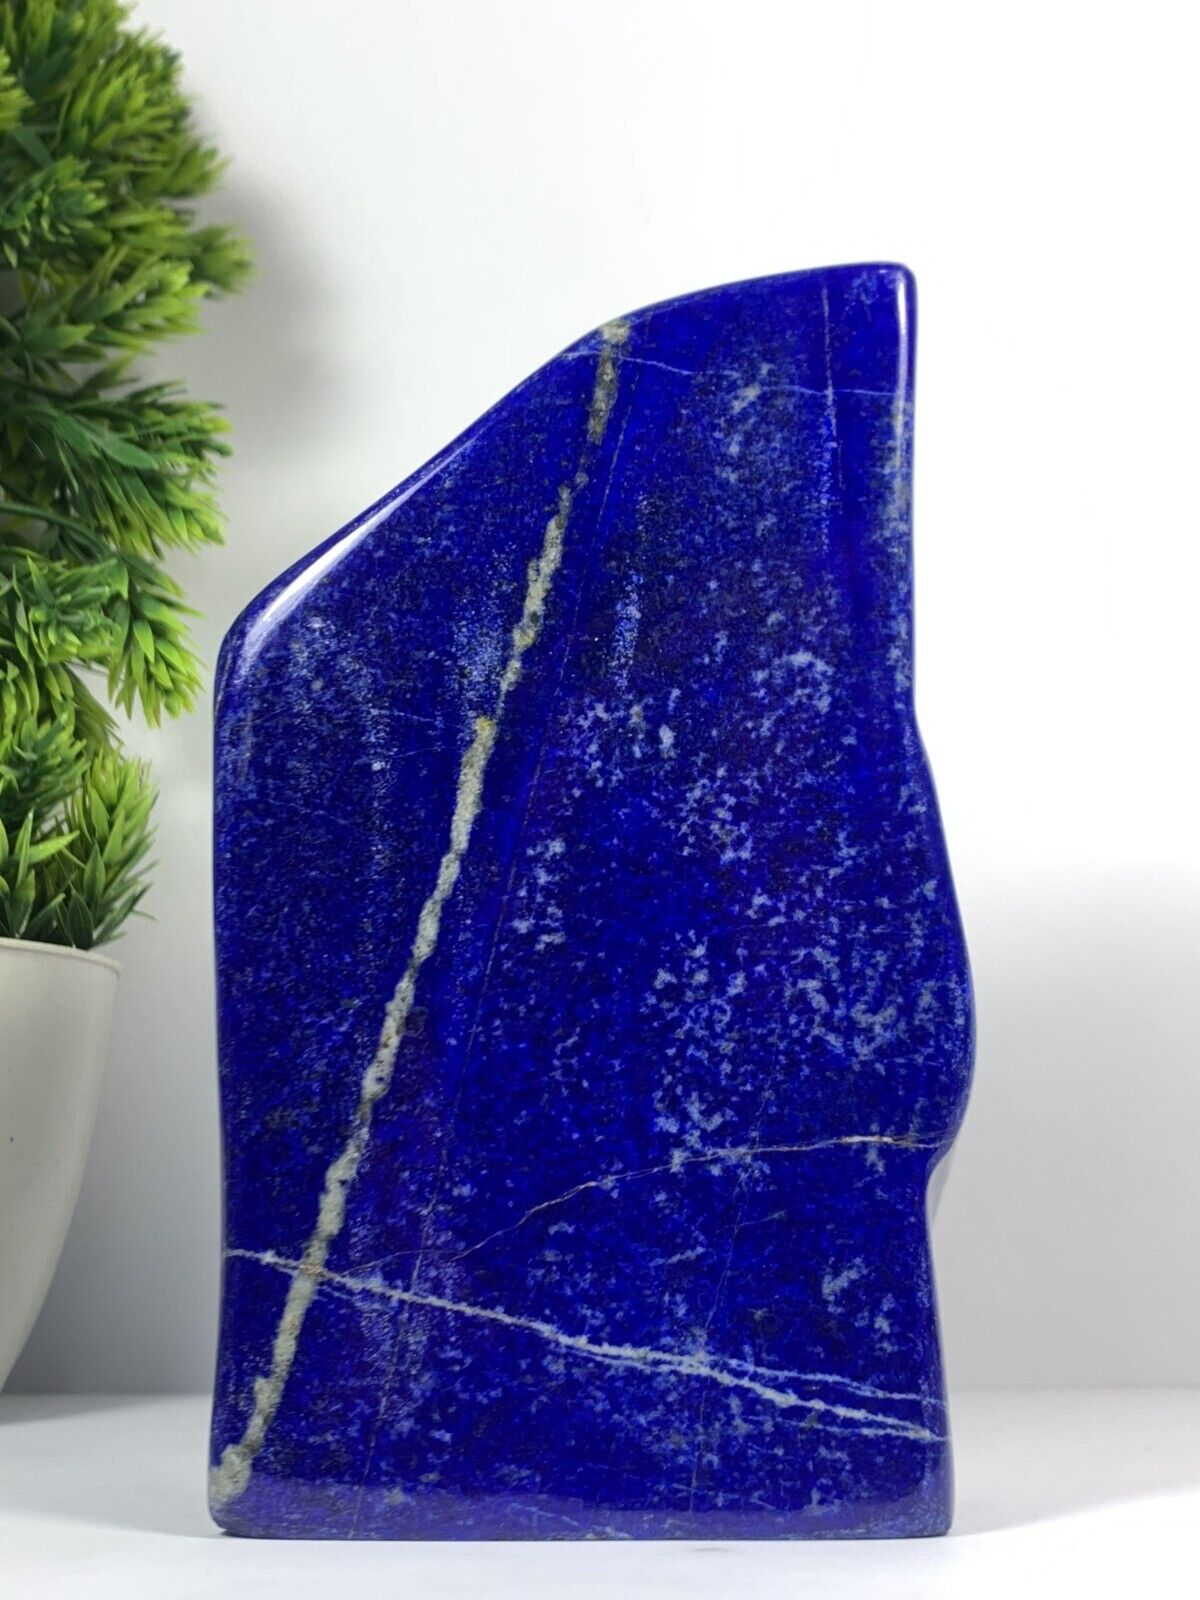 2091 Gram A+++ Natural Beautiful Polished Freeform Lapis Lazuli From Afghanistan